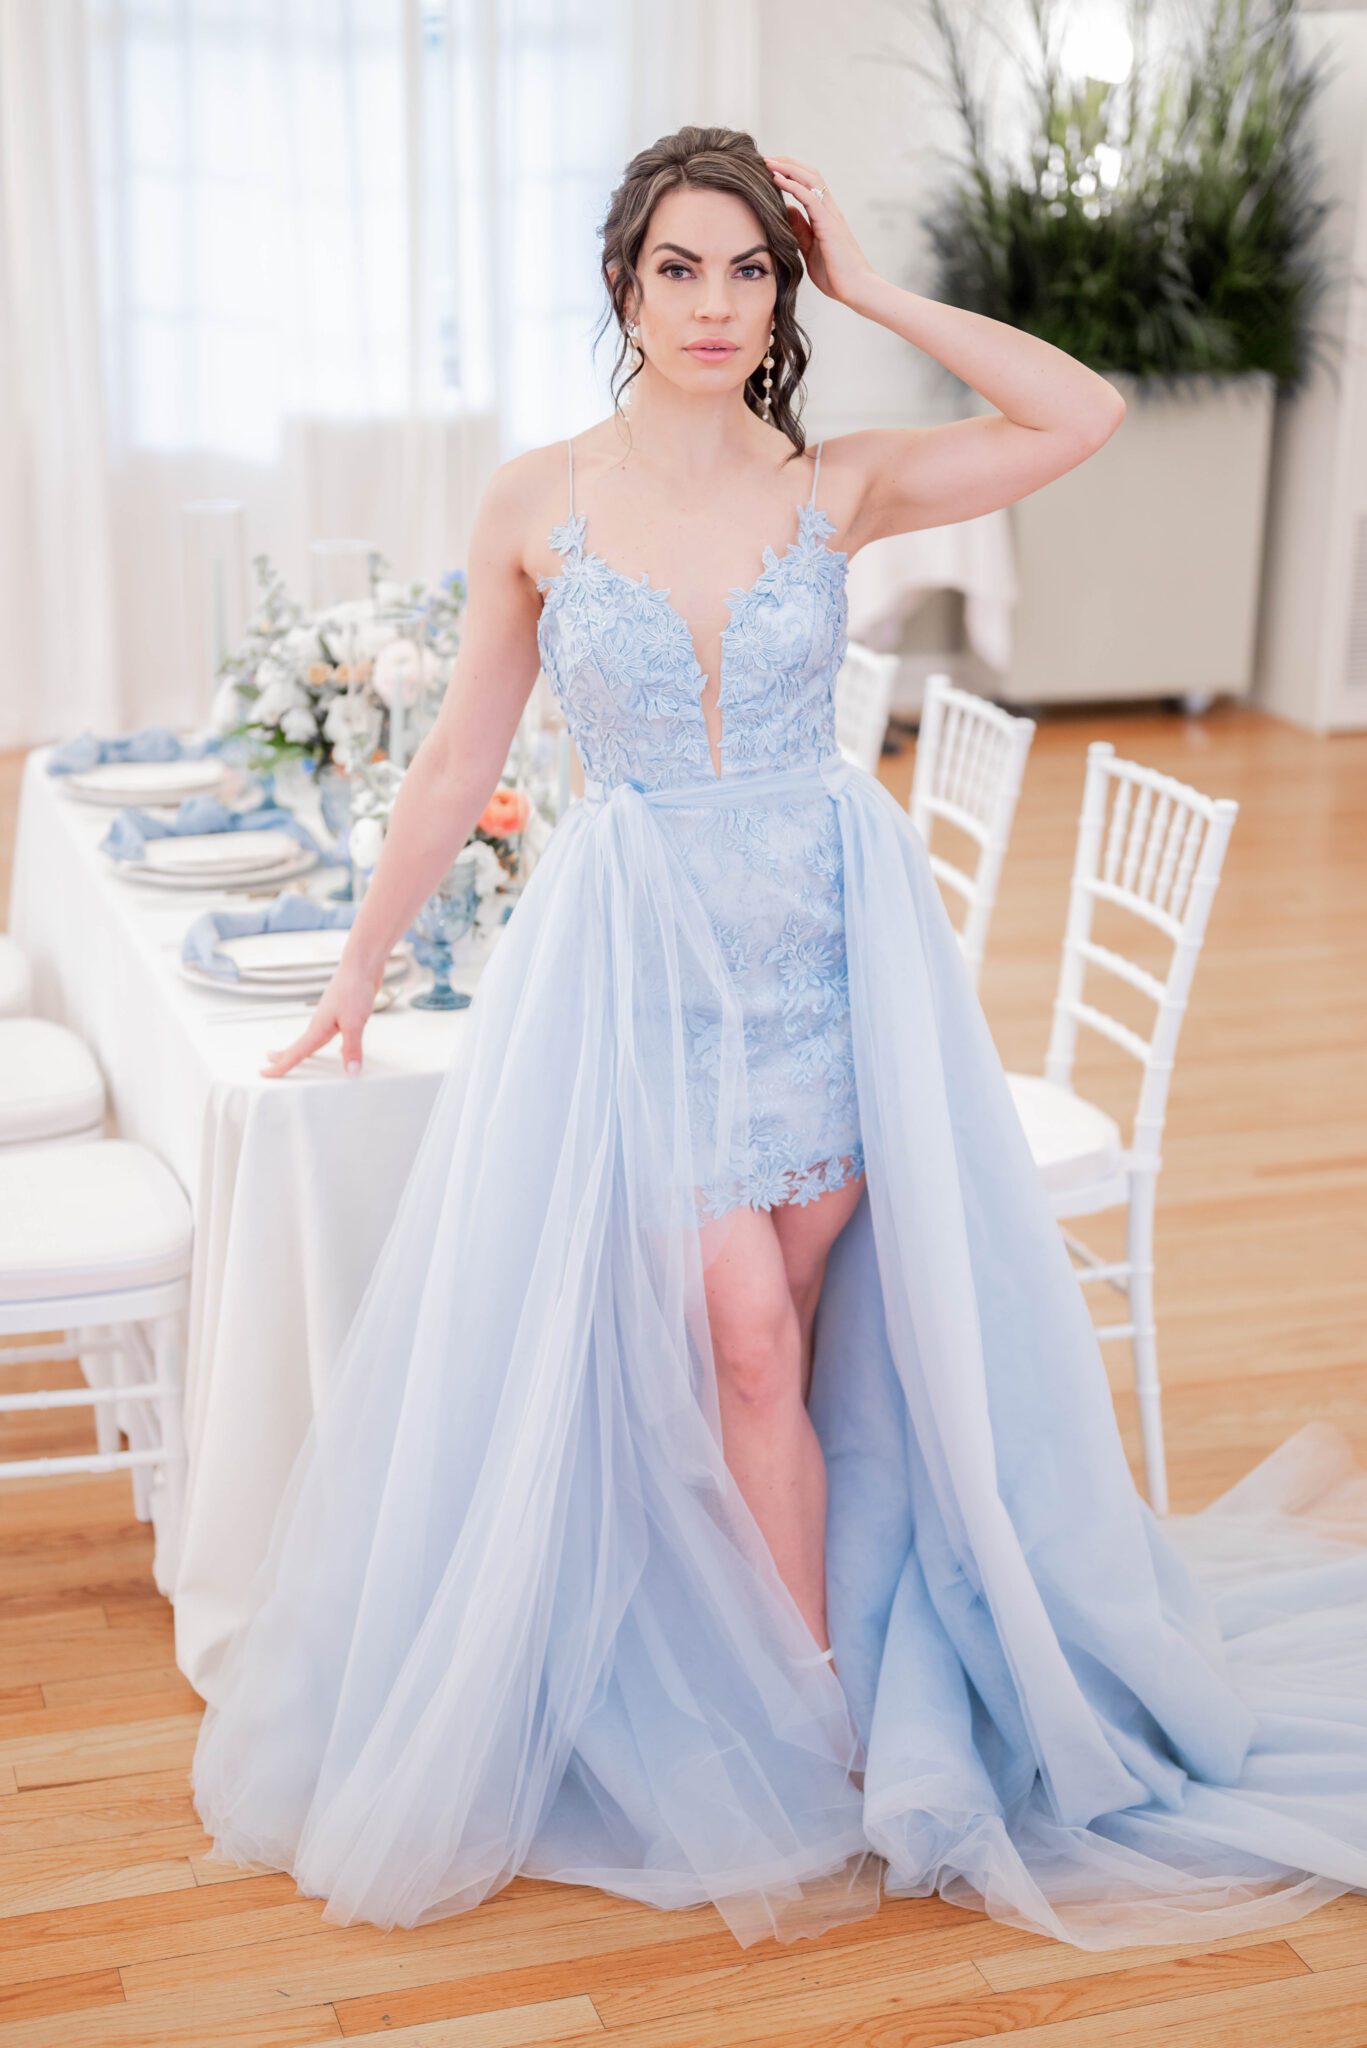 Feminine baby blue high/low wedding gown, coloured wedding dress inspiration for spring wedding, bridal portrait by guest table styled with vintage blue glassware